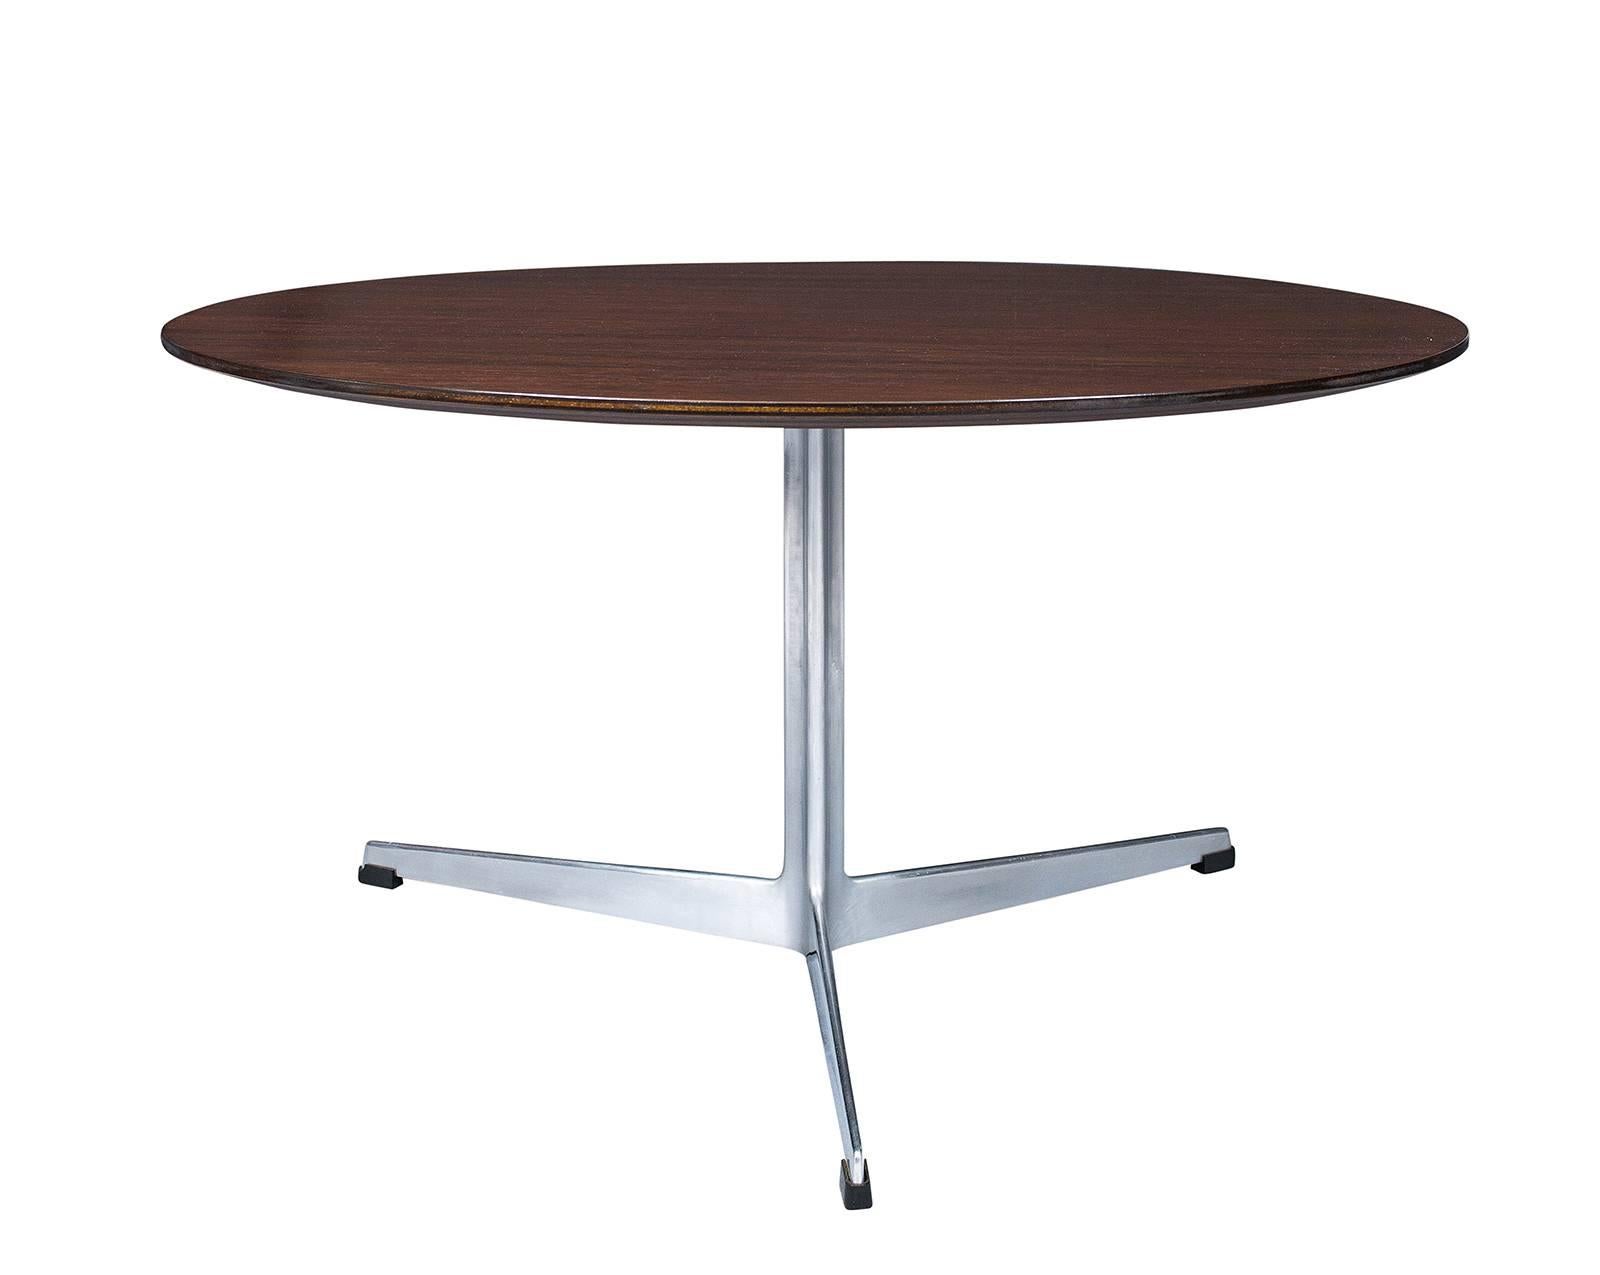 Arne Jacobsen Rosewood Coffee Table Produced by Fritz Hansen.    Store formerly known as ARTFUL DODGER INC 